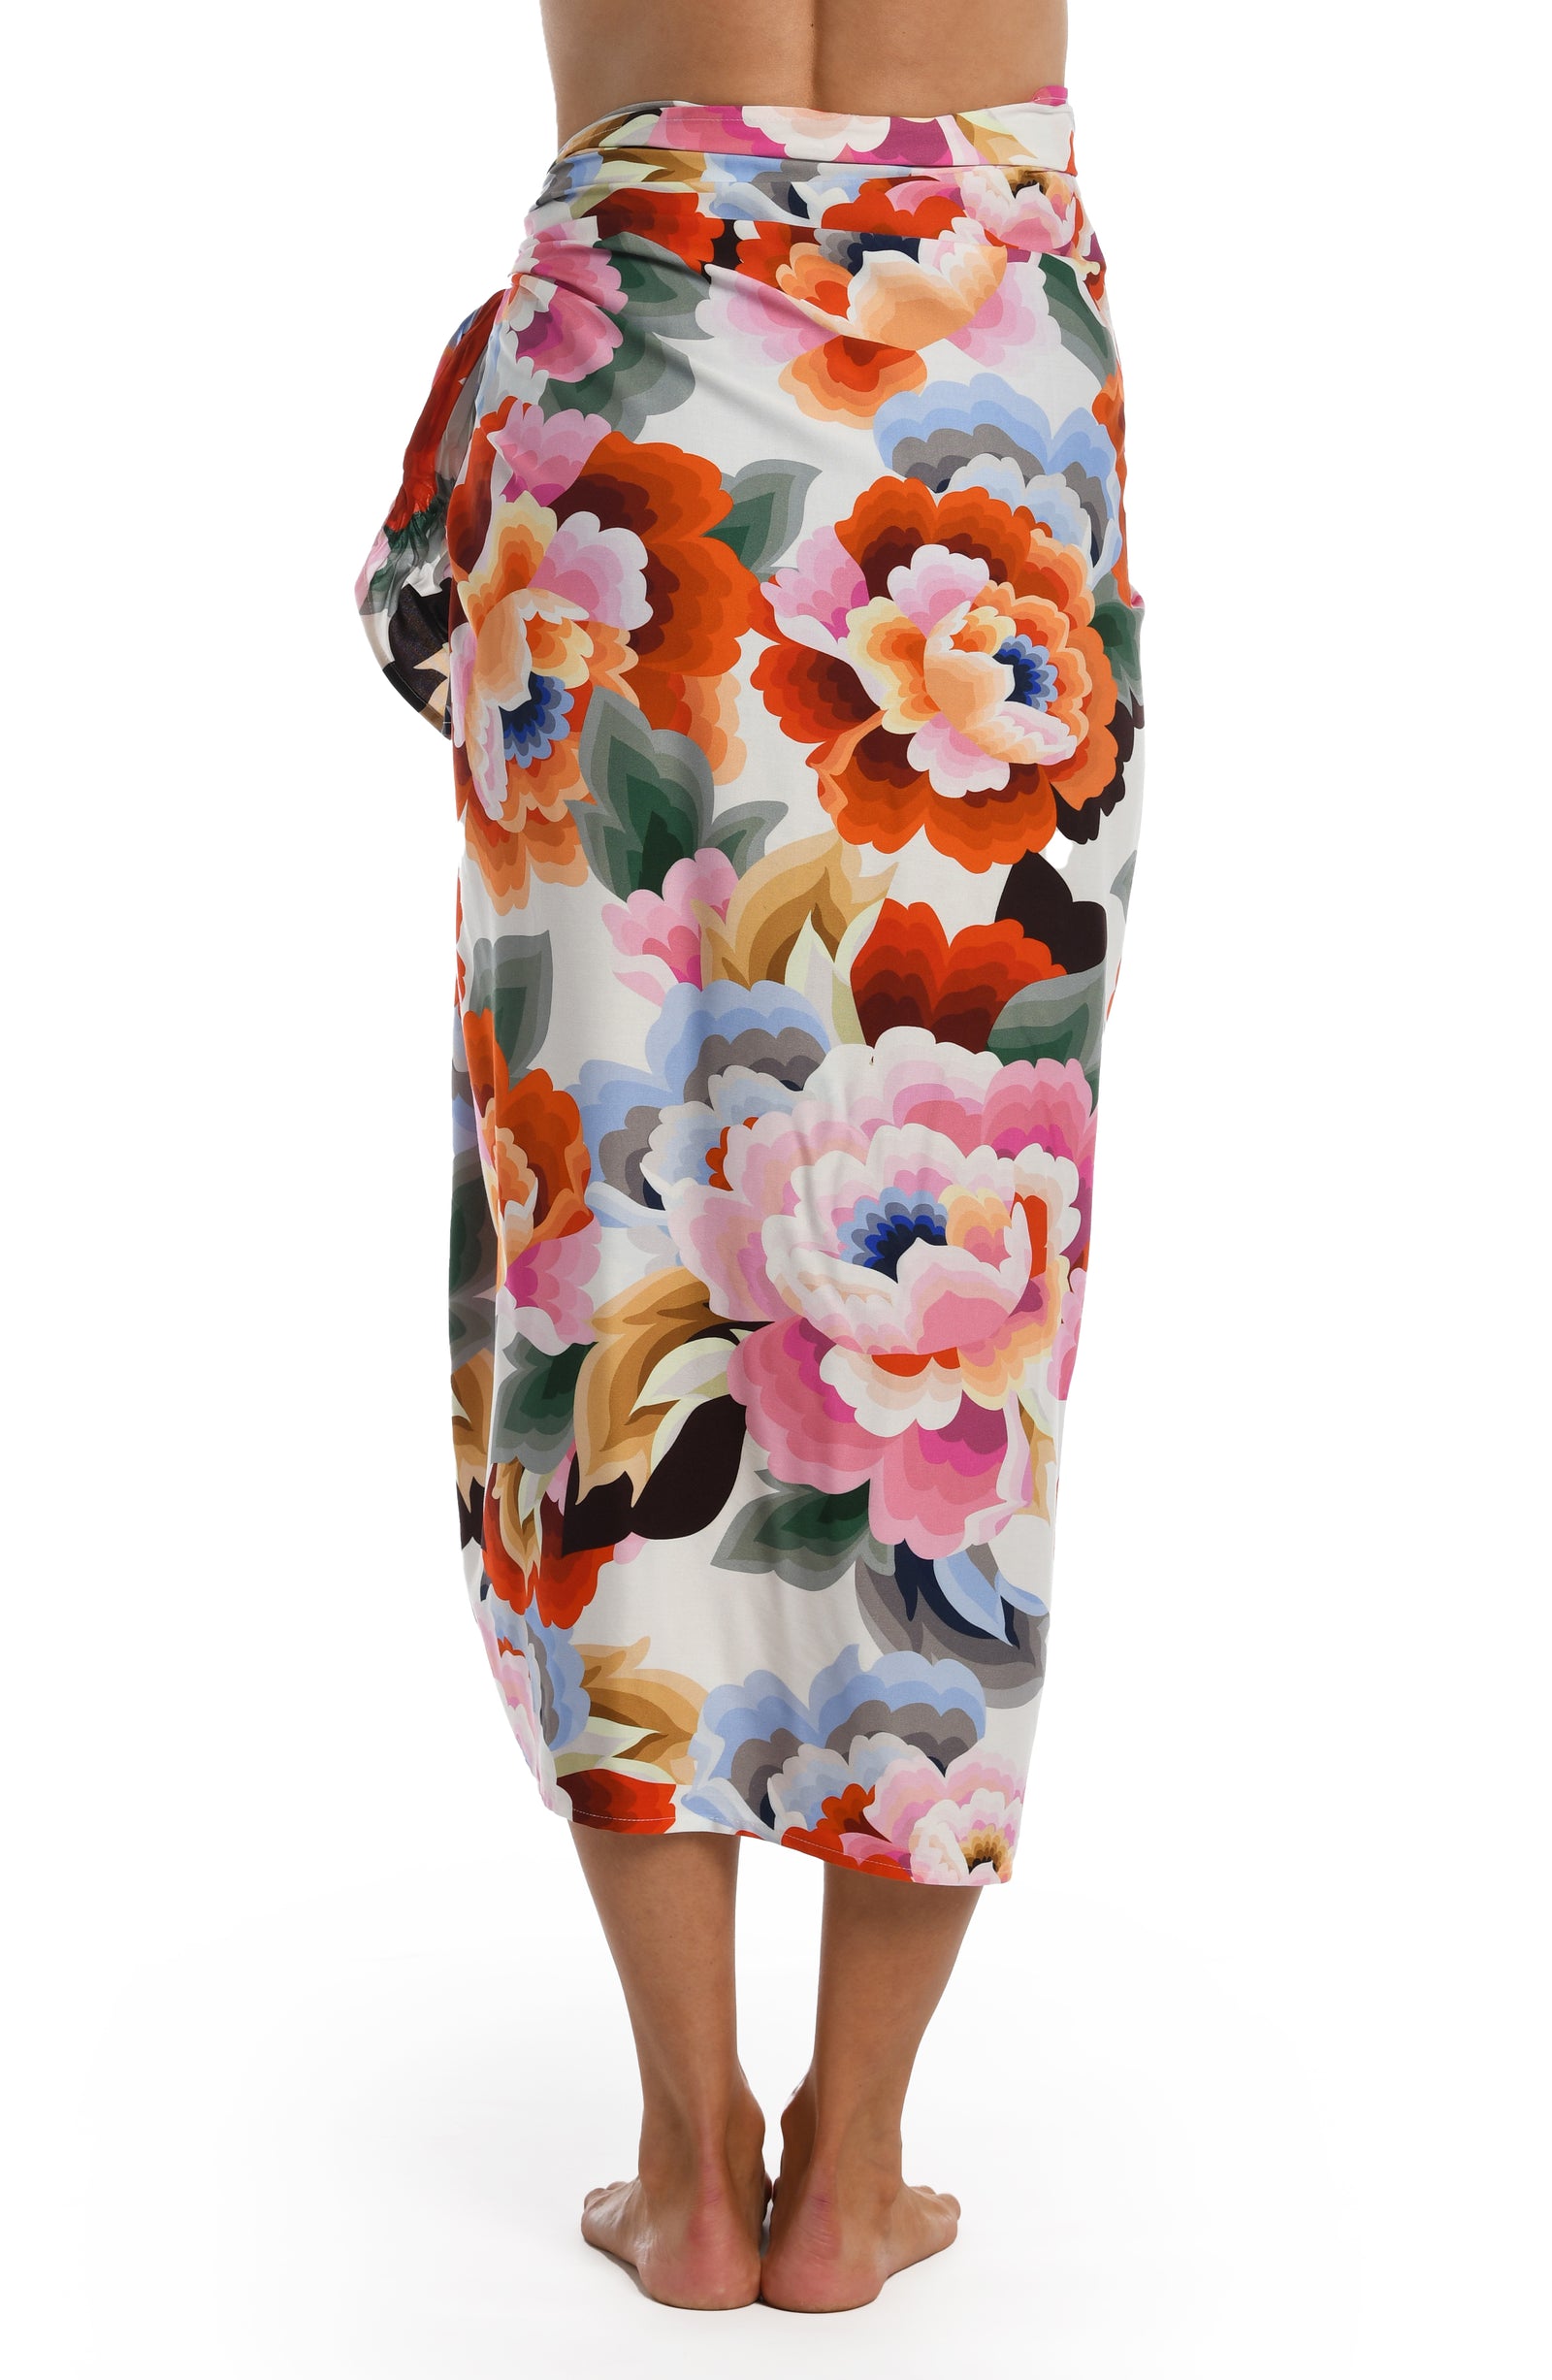 Floral Rhythm Collection  Pareo - One Size Skirt  Fabric Content: 100% Rayon Crepe  Product#: LB3VE40